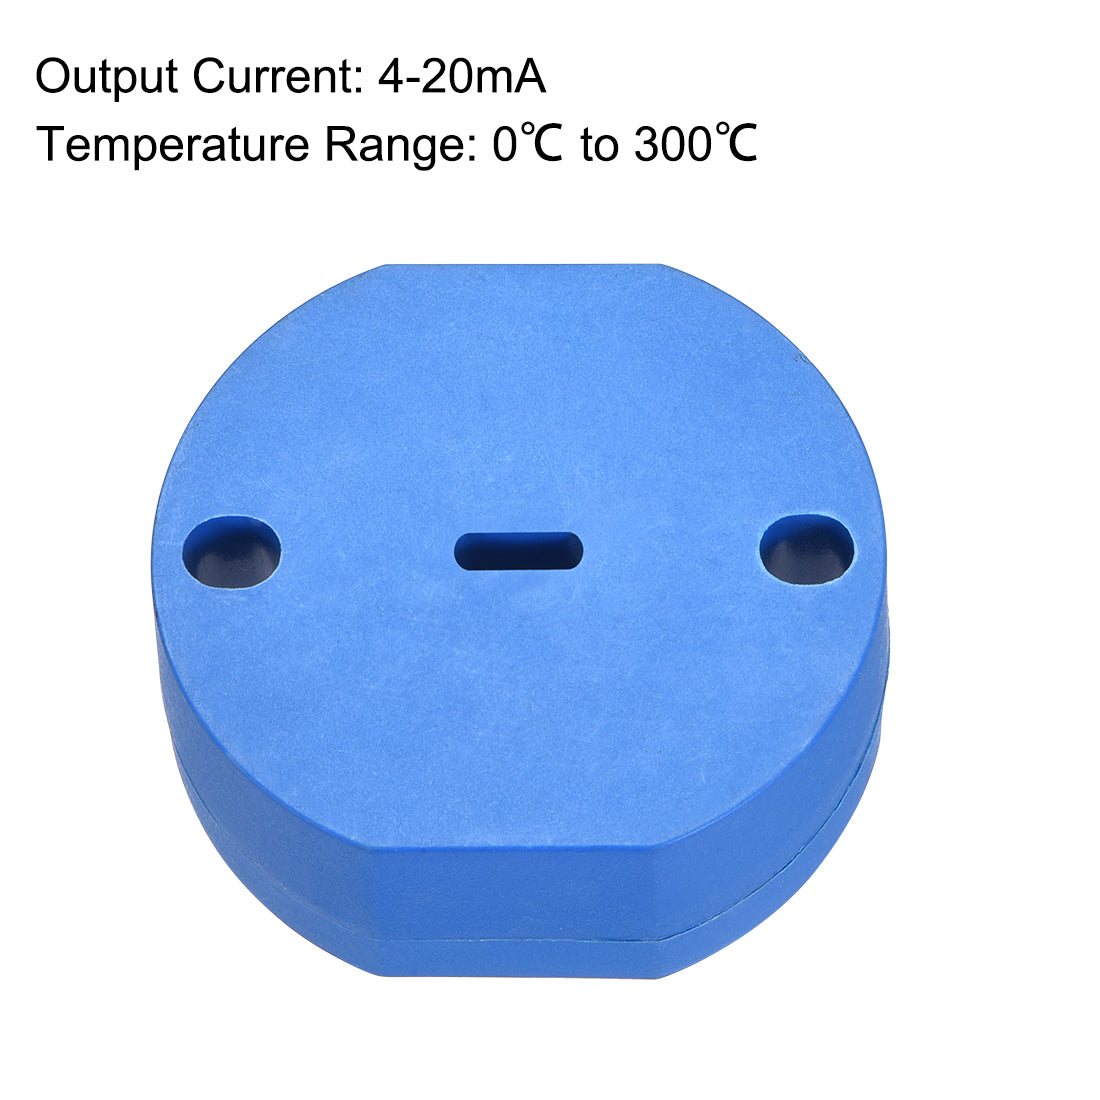 uxcell Uxcell PT100 Temperature Sensor Transmitter 24V DC 4-20mA 0℃ to 300℃